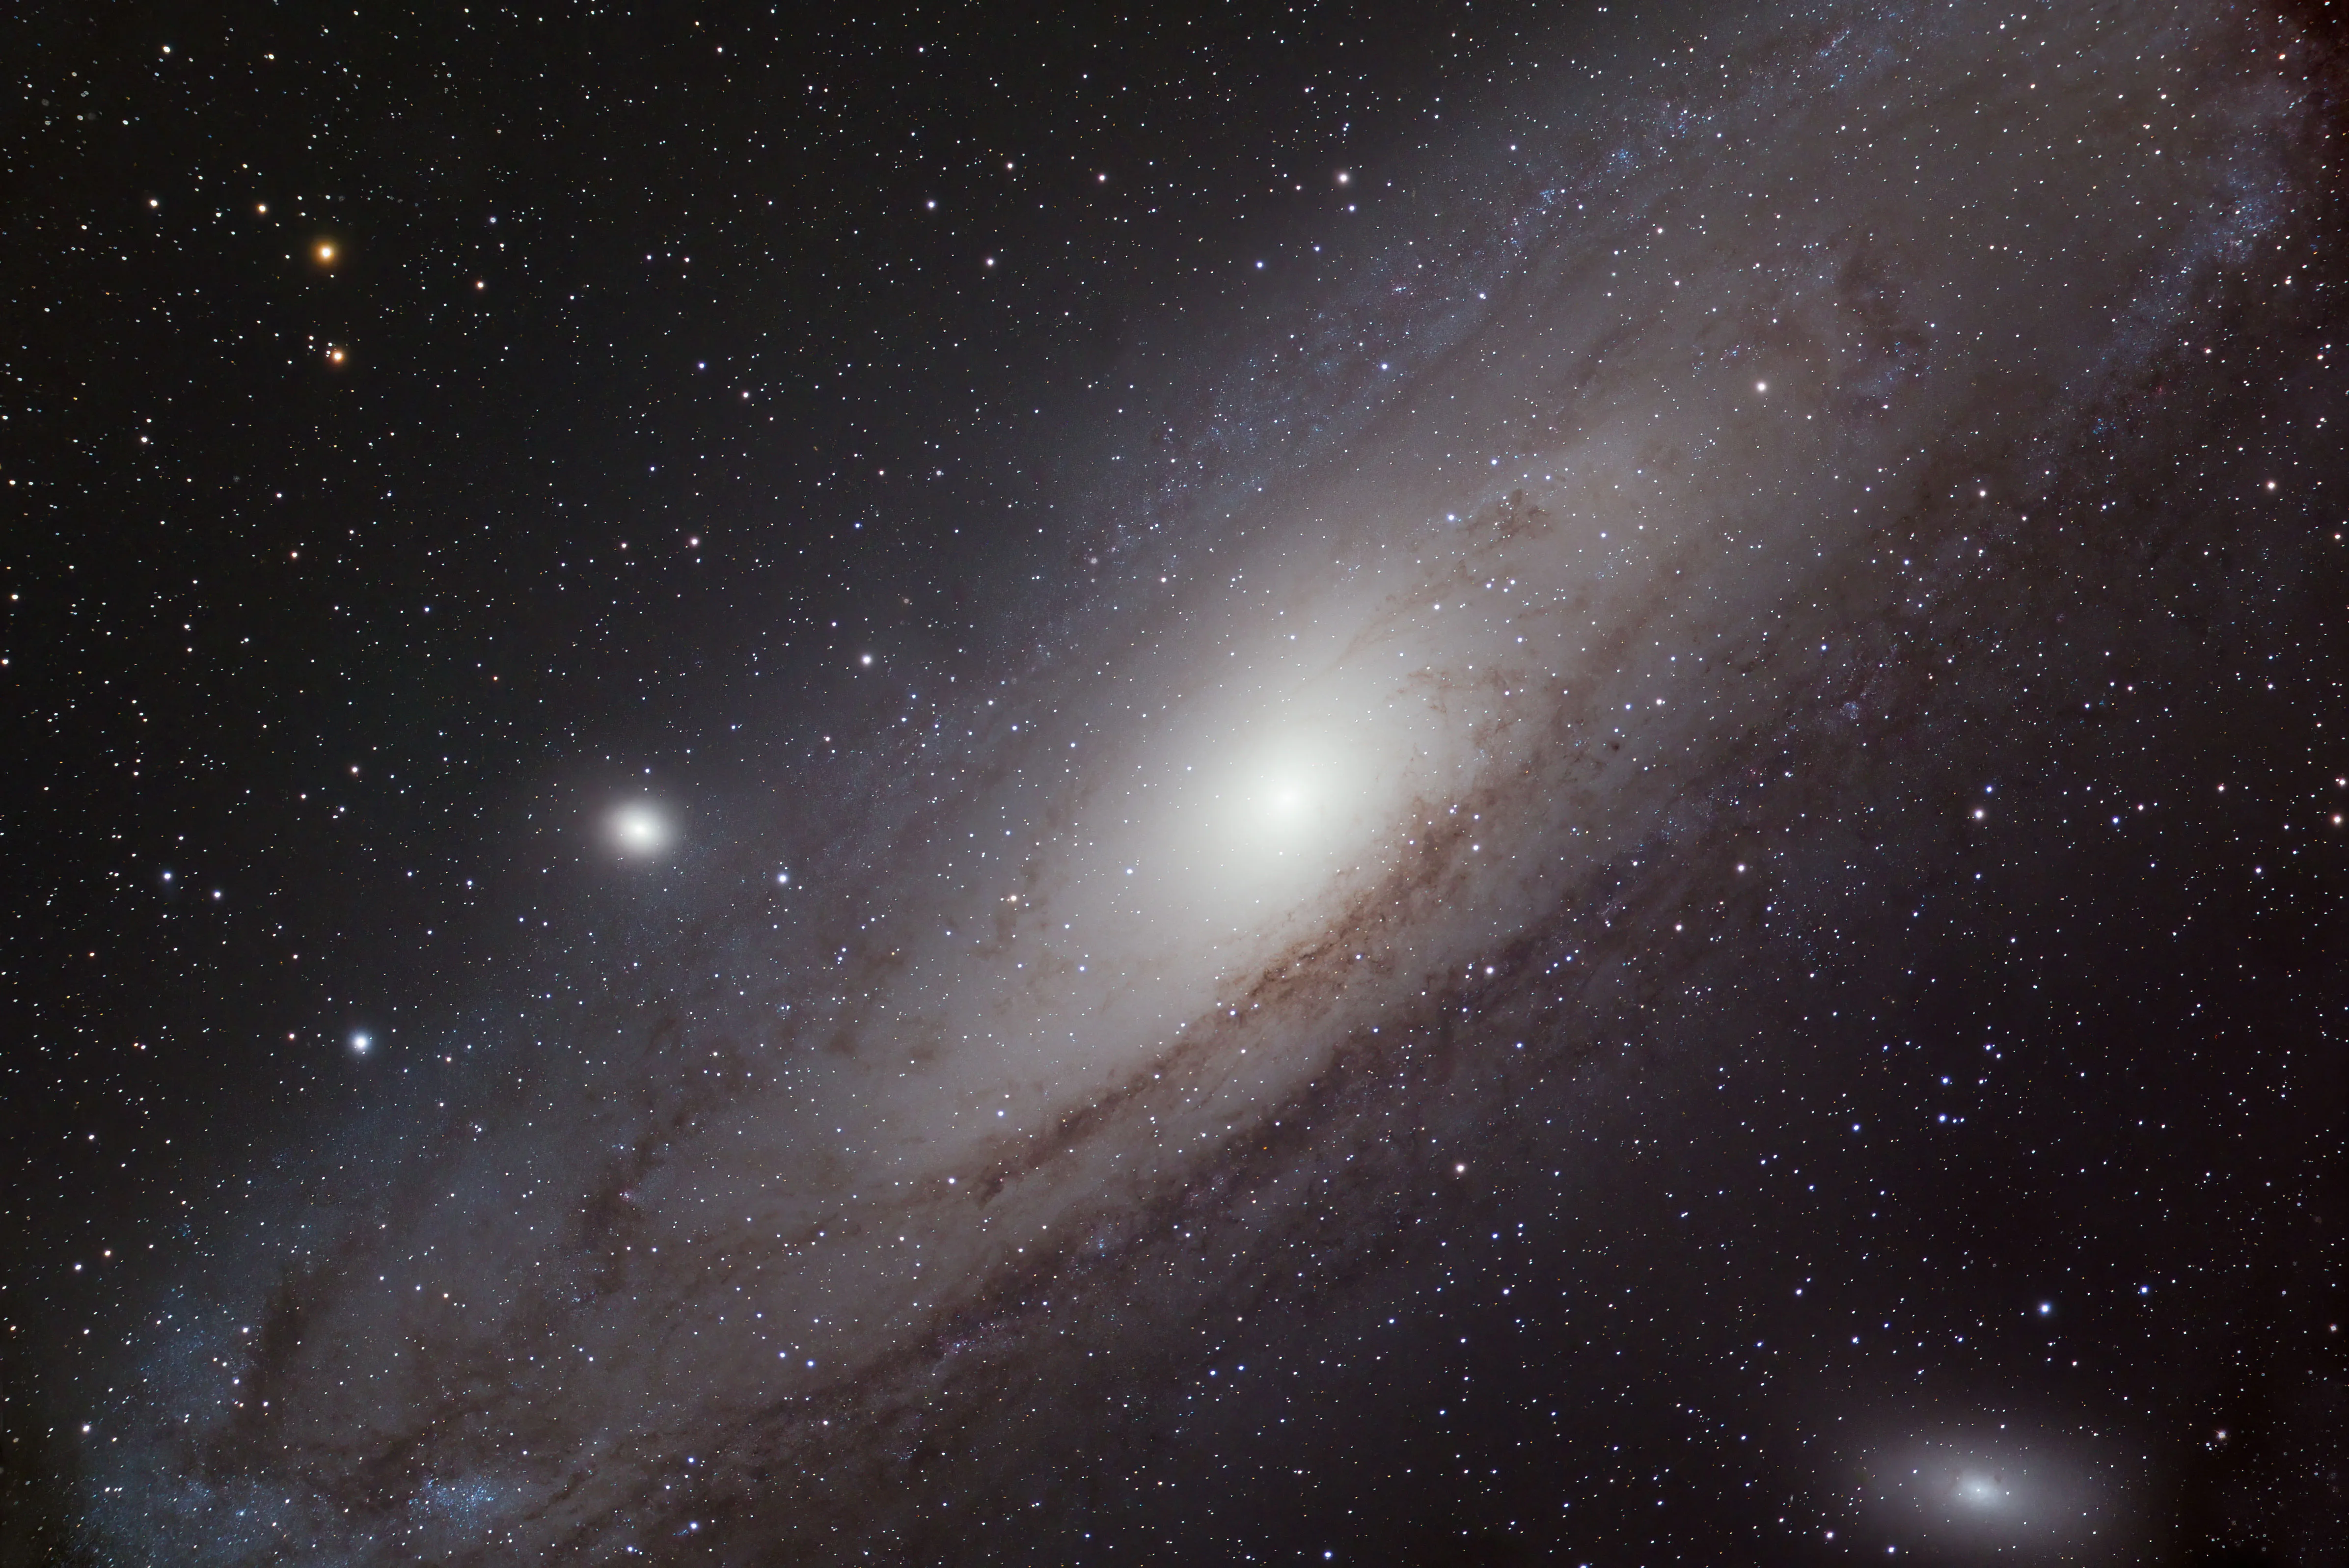 High resolution astrophoto of M31 taken in just 15 minutes